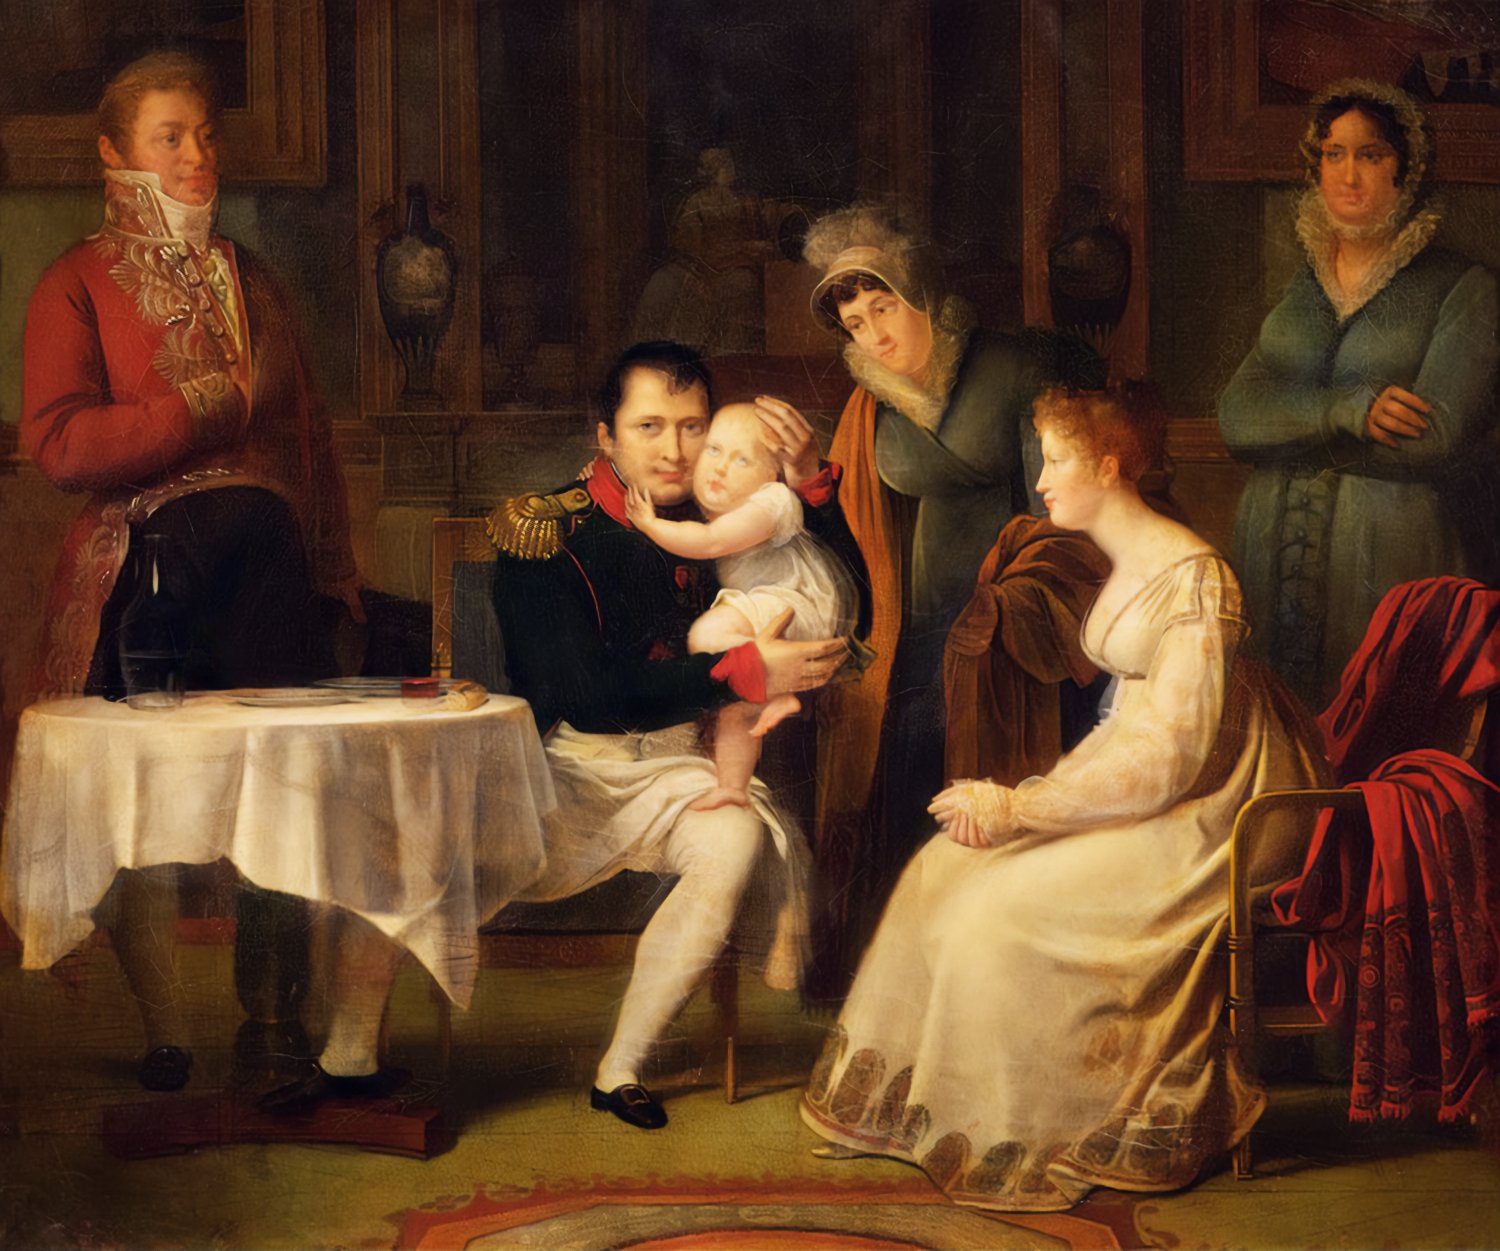 Intimate portrait depicting Napoleon I seated, lovingly holding his son, the King of Rome, while his wife, Marie Louise, sits nearby gazing affectionately at the child. To the left, a dignified official in a red military uniform stands near a table, observing the tender family moment. To the right, two female attendants look on, one with a caring expression and the other more stoic.